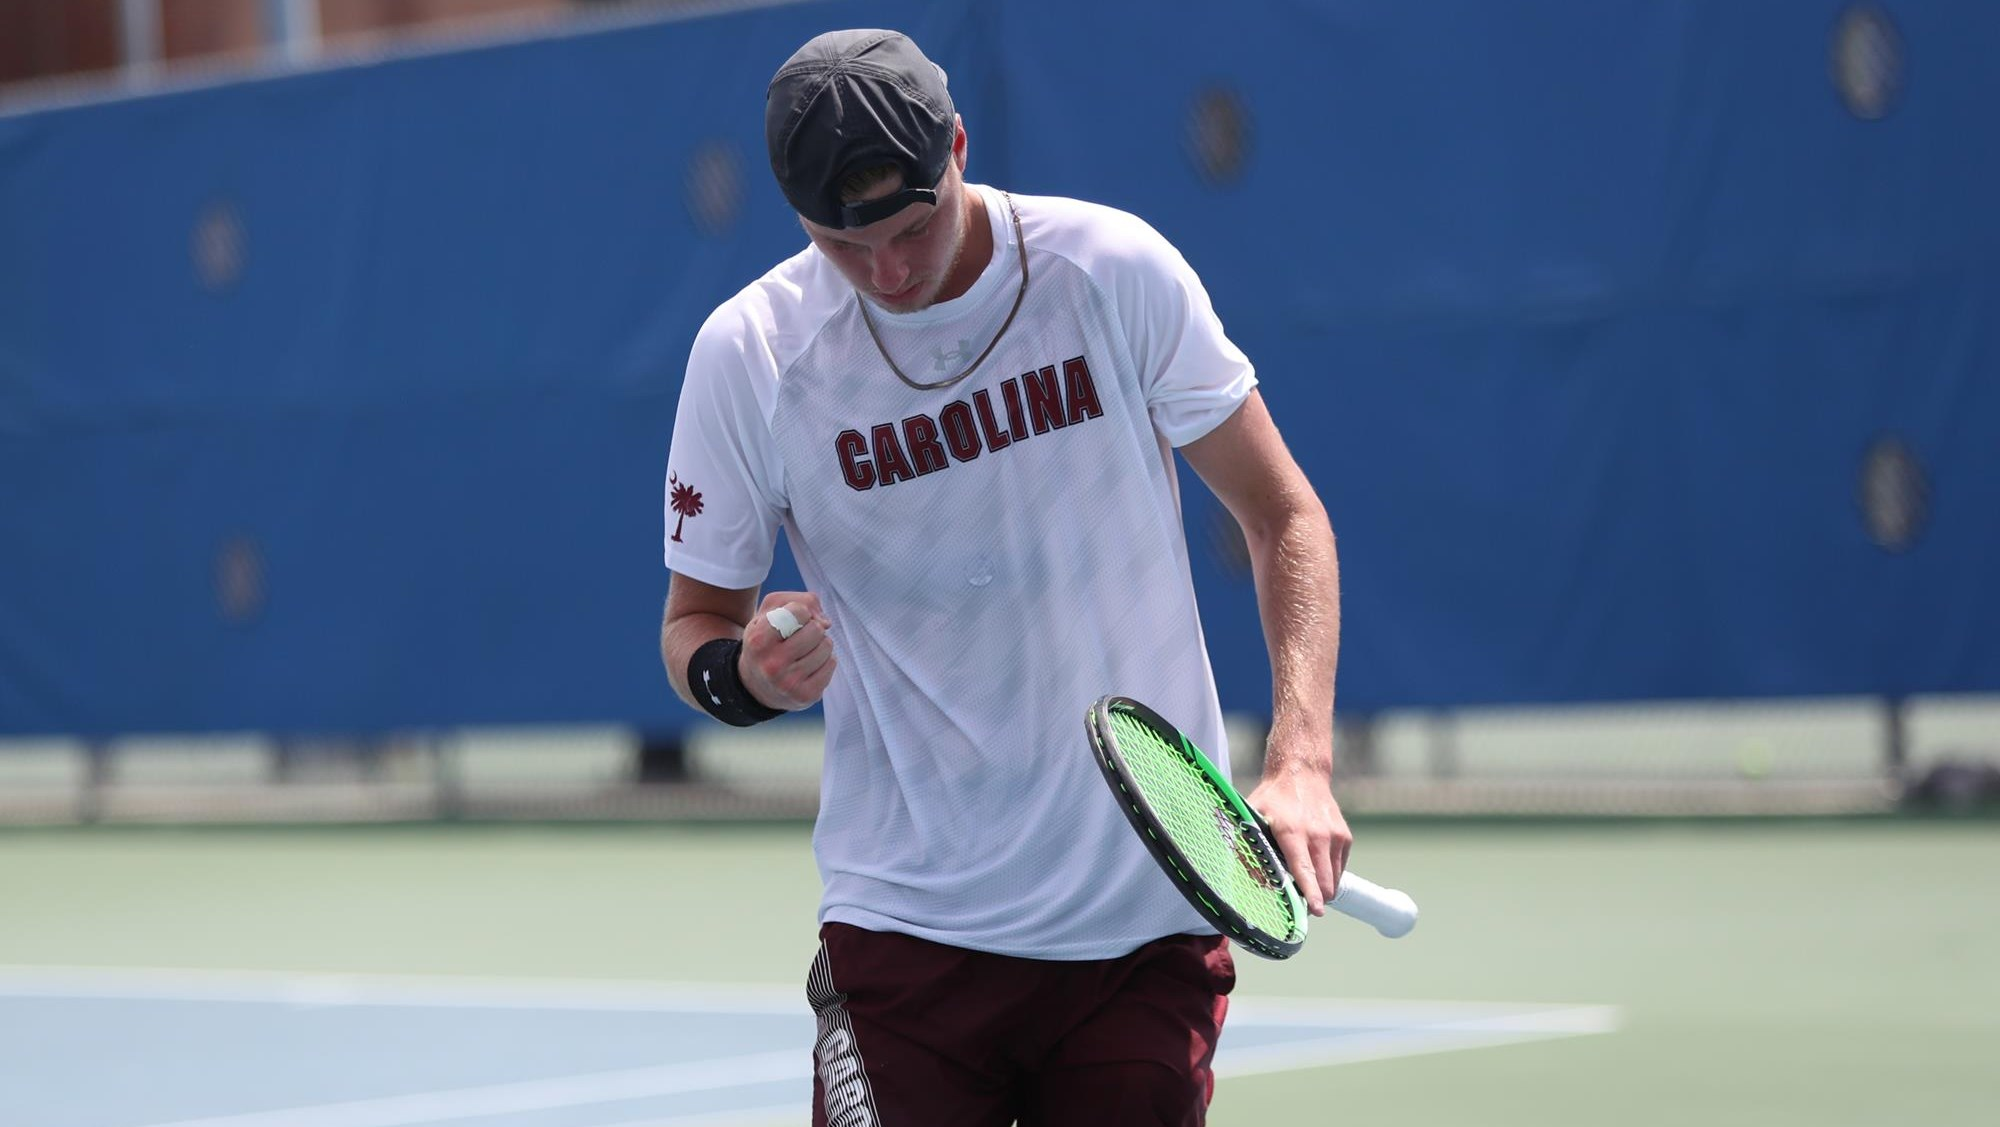 Samuel, Thomson to play in Doubles Semifinals